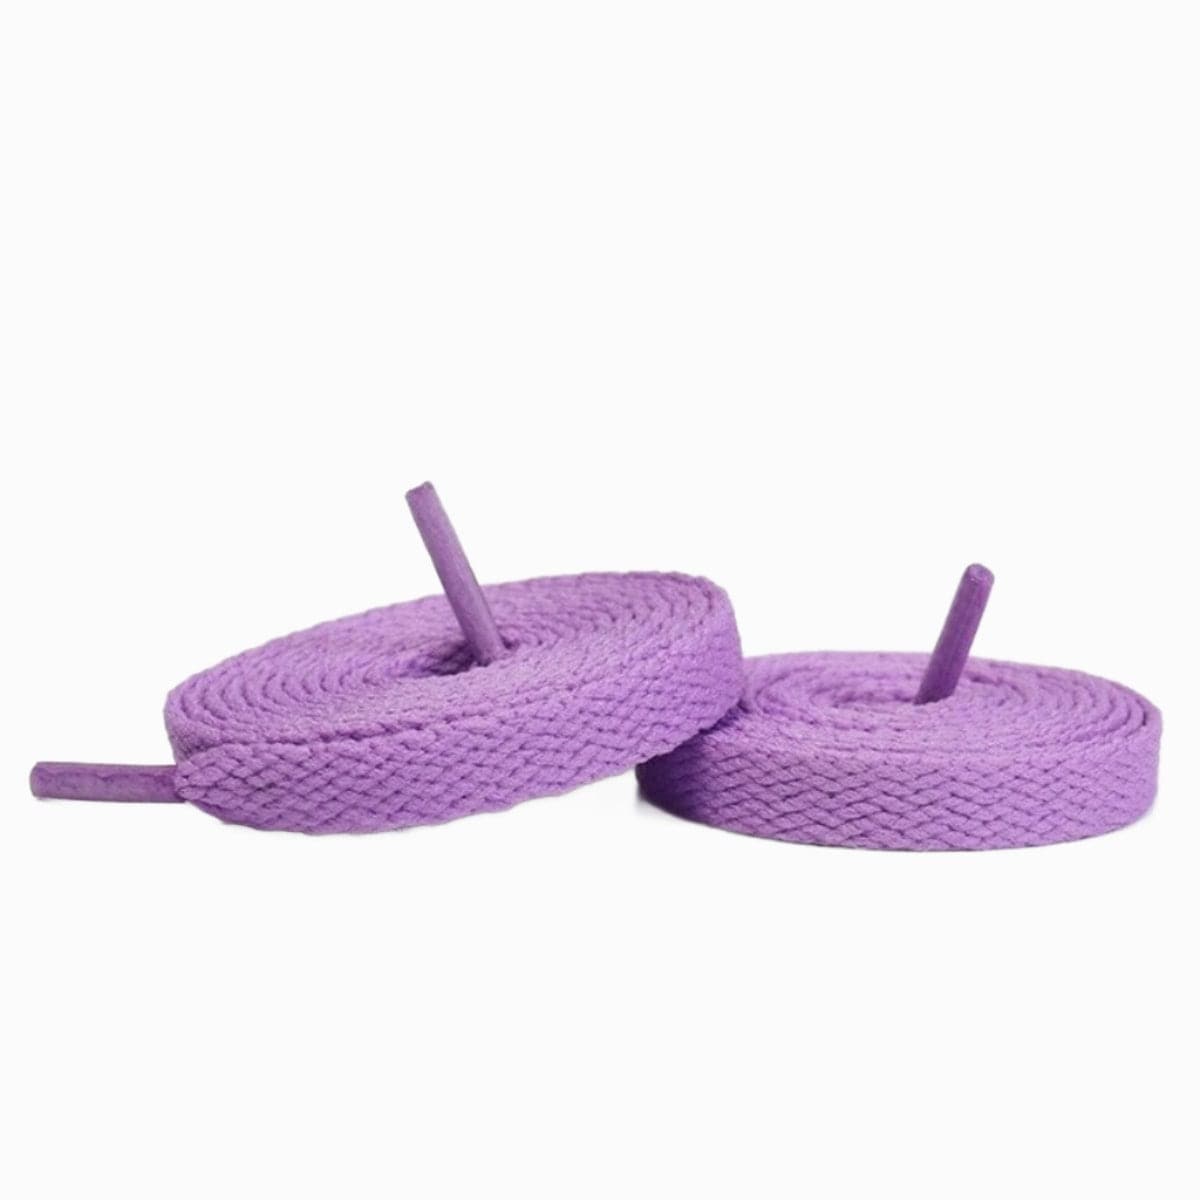 Pastel Purple Replacement Adidas Shoe Laces for Adidas Handball Spezial Sneakers by Kicks Shoelaces